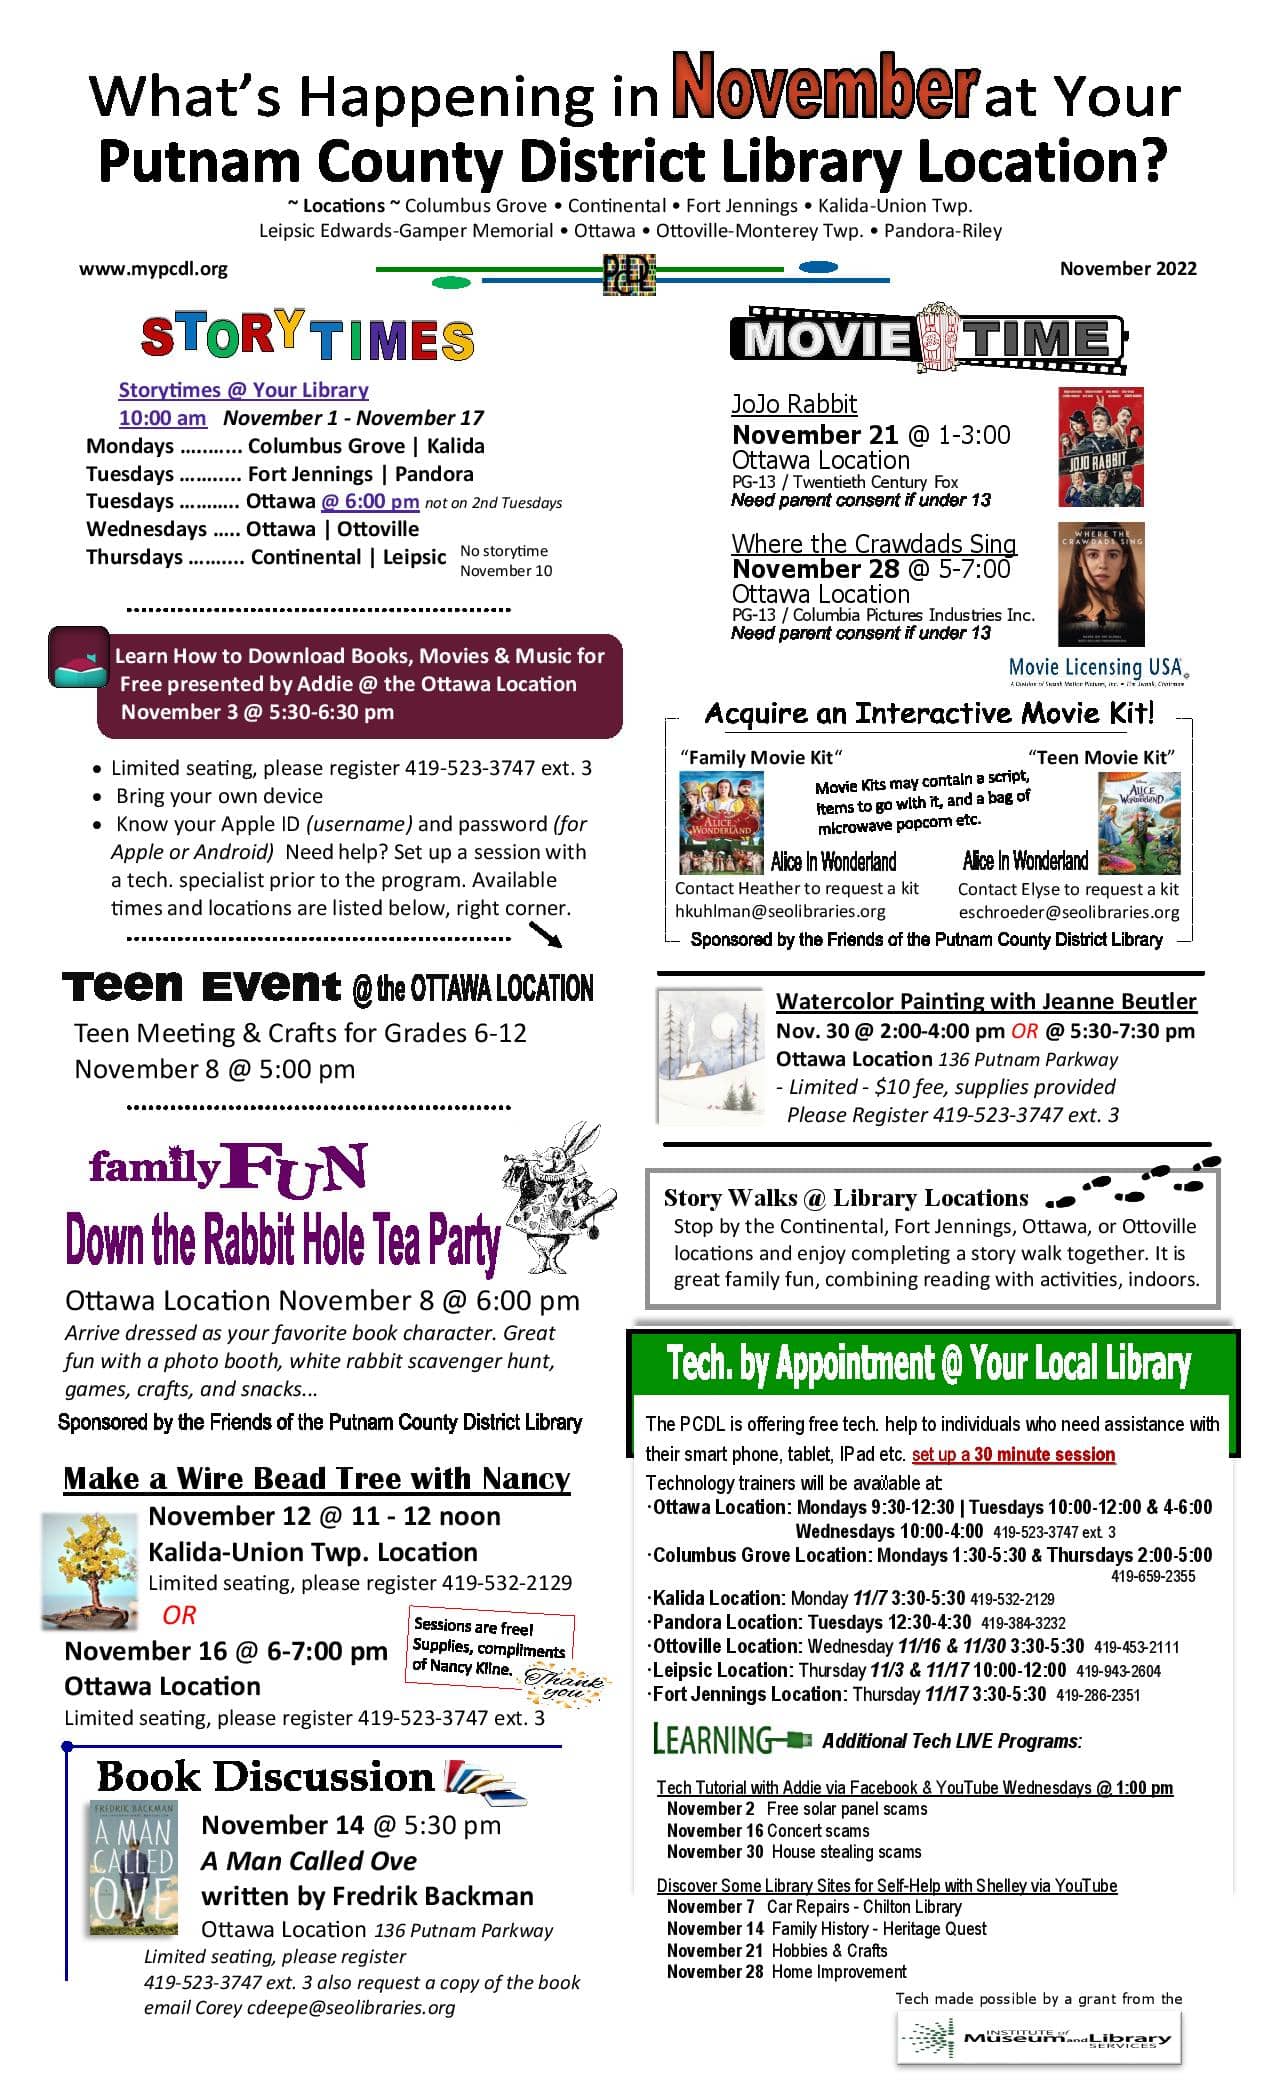 What's happing in November at  your Putnam County District Library Location flyer